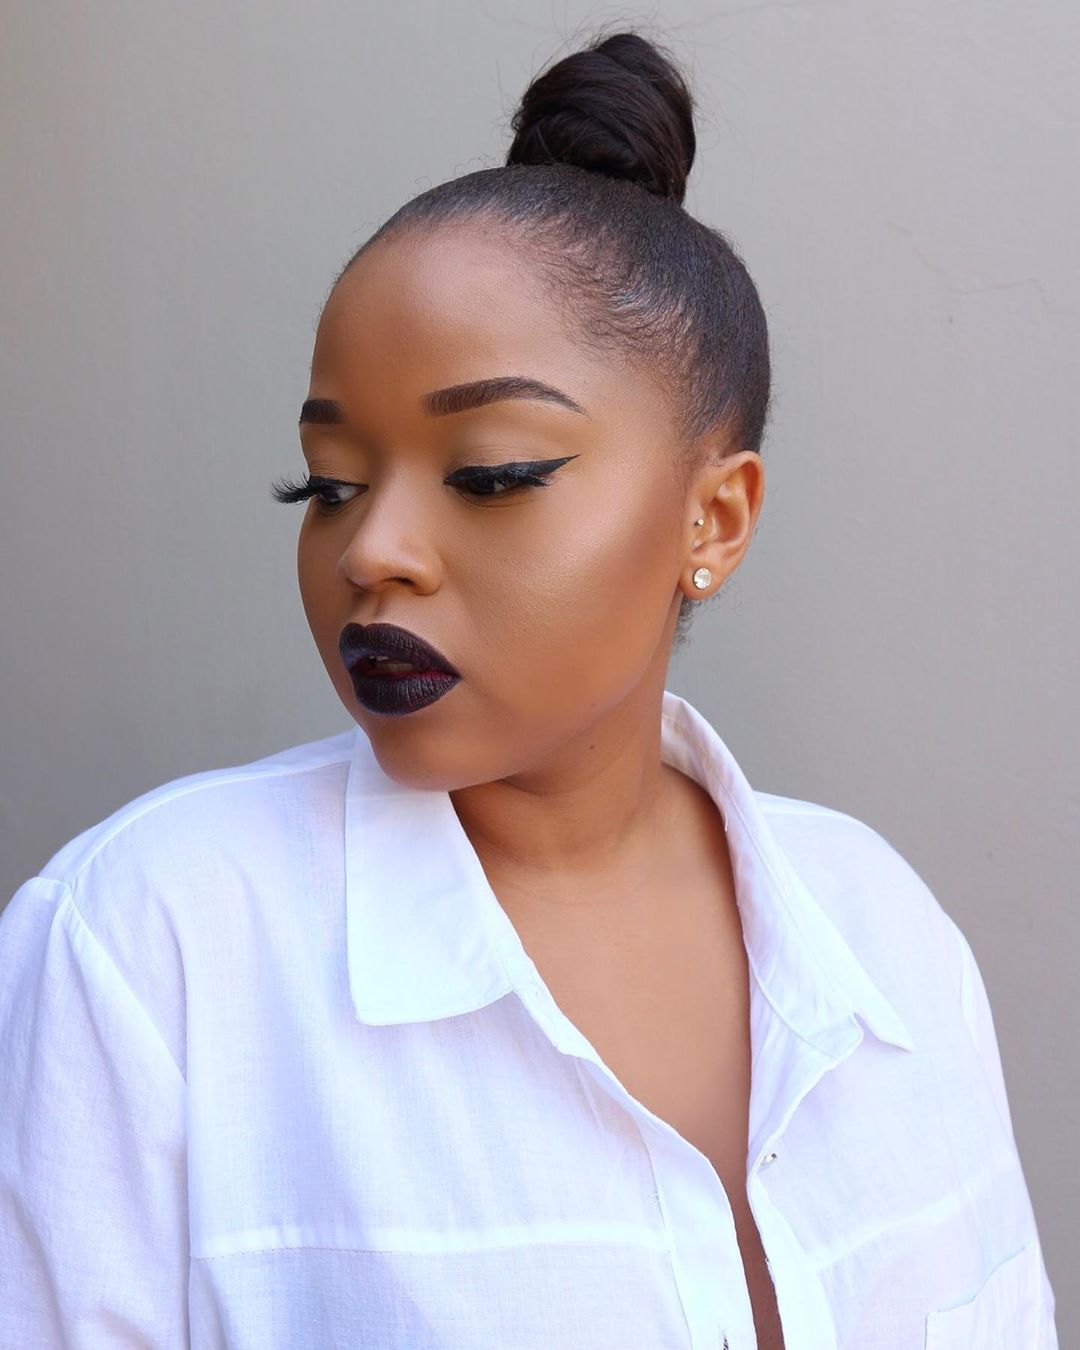 Winged-liner-on-brown-skin-girl-style-rave